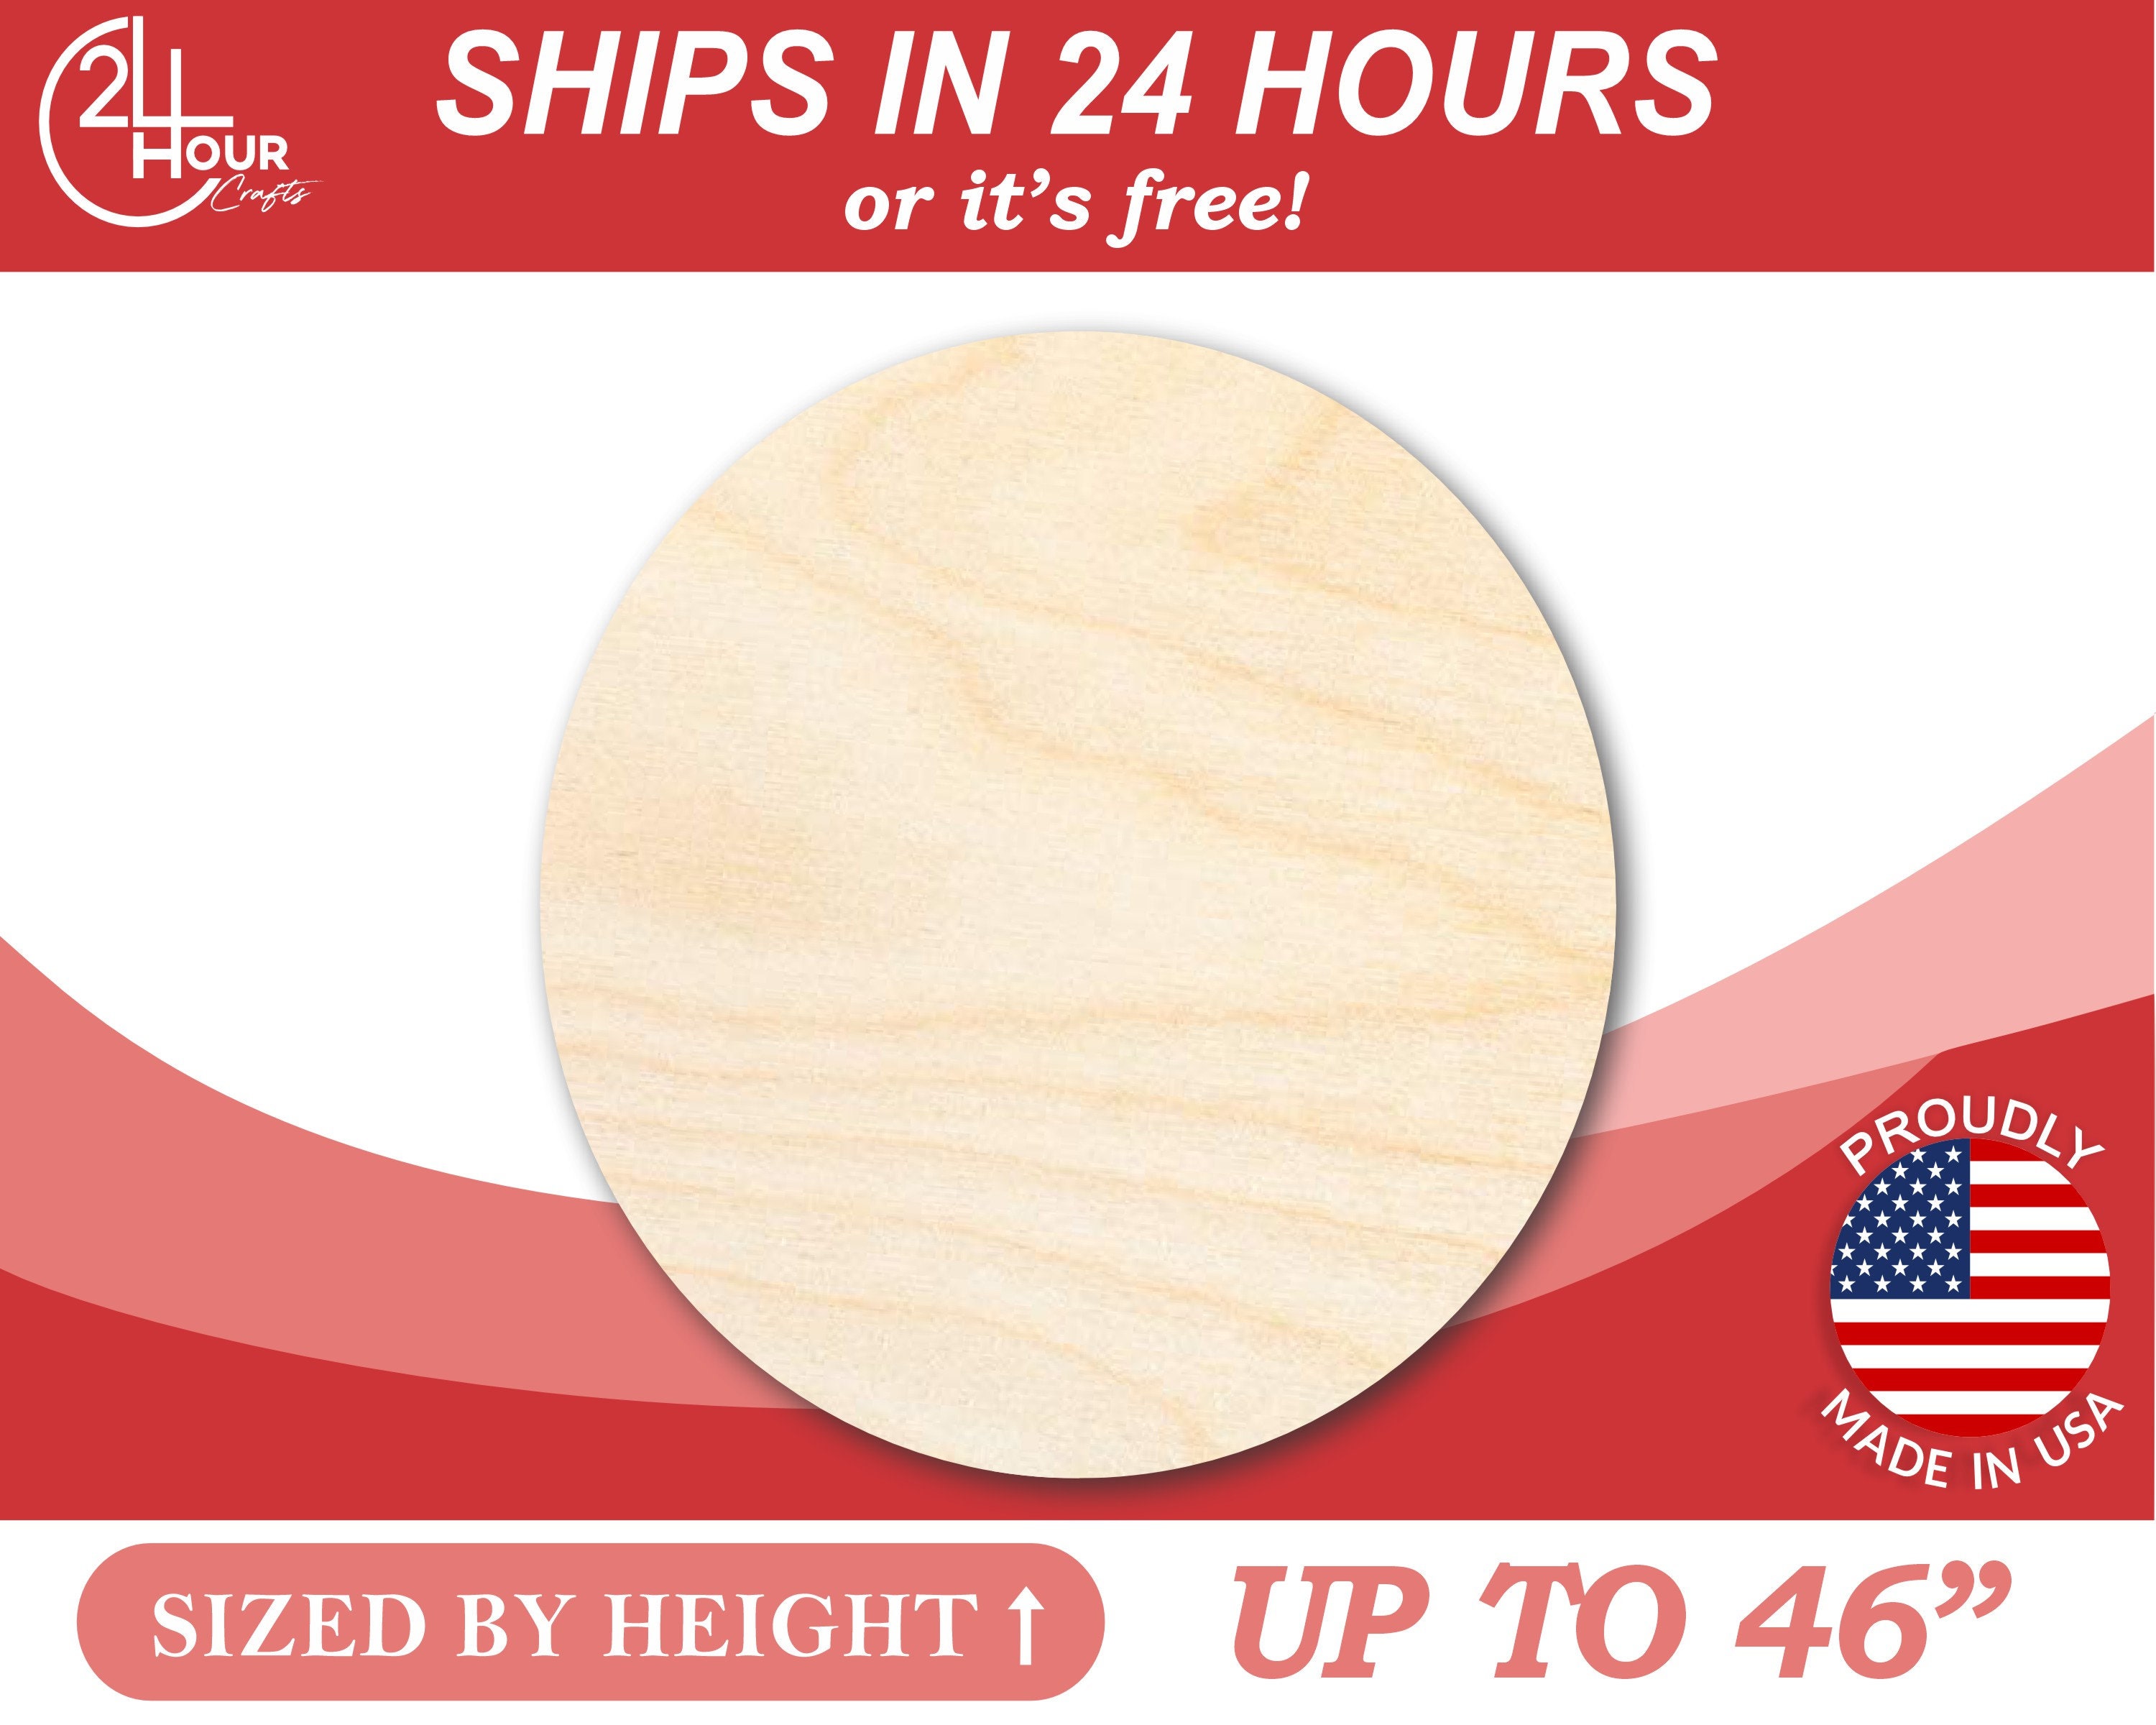 24 Pack 8 Inch Wooden Circles for Crafts 0.2 Thick Unfinished Round Wood  Slices Natural Rounds Wooden Cutouts Blank Round Wood Discs for DIY Crafts